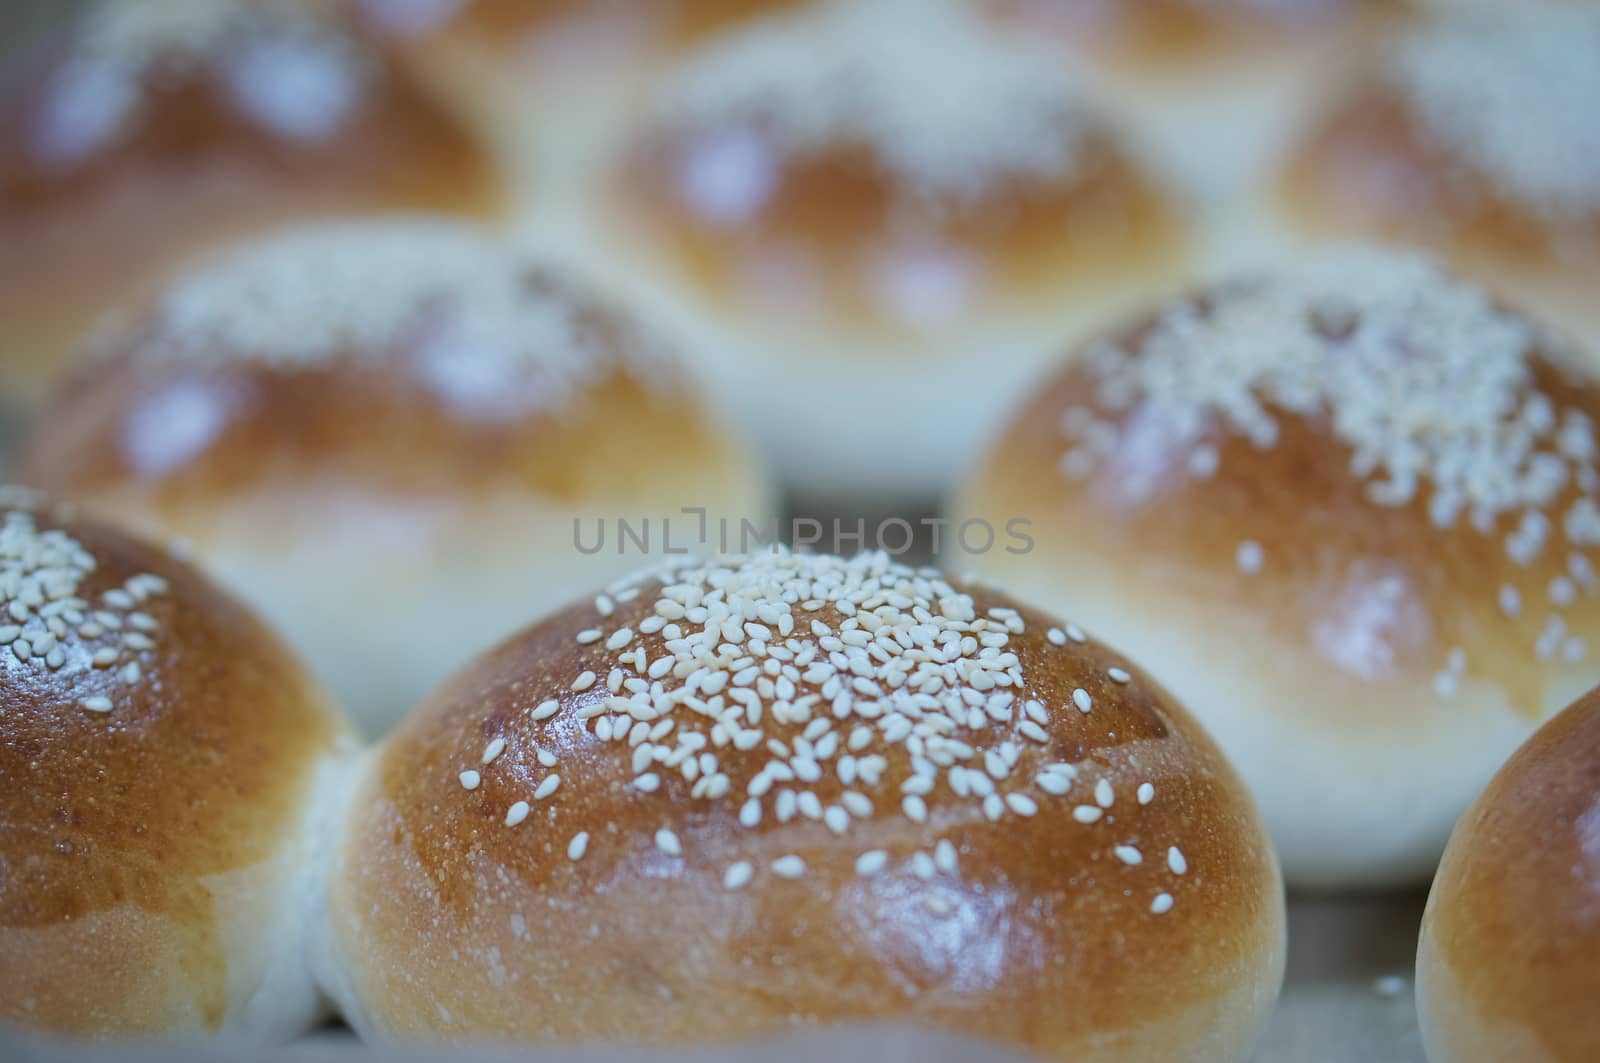 Round loaf of sandwich bun with sesame seeds on aluminium tray in kitchen.